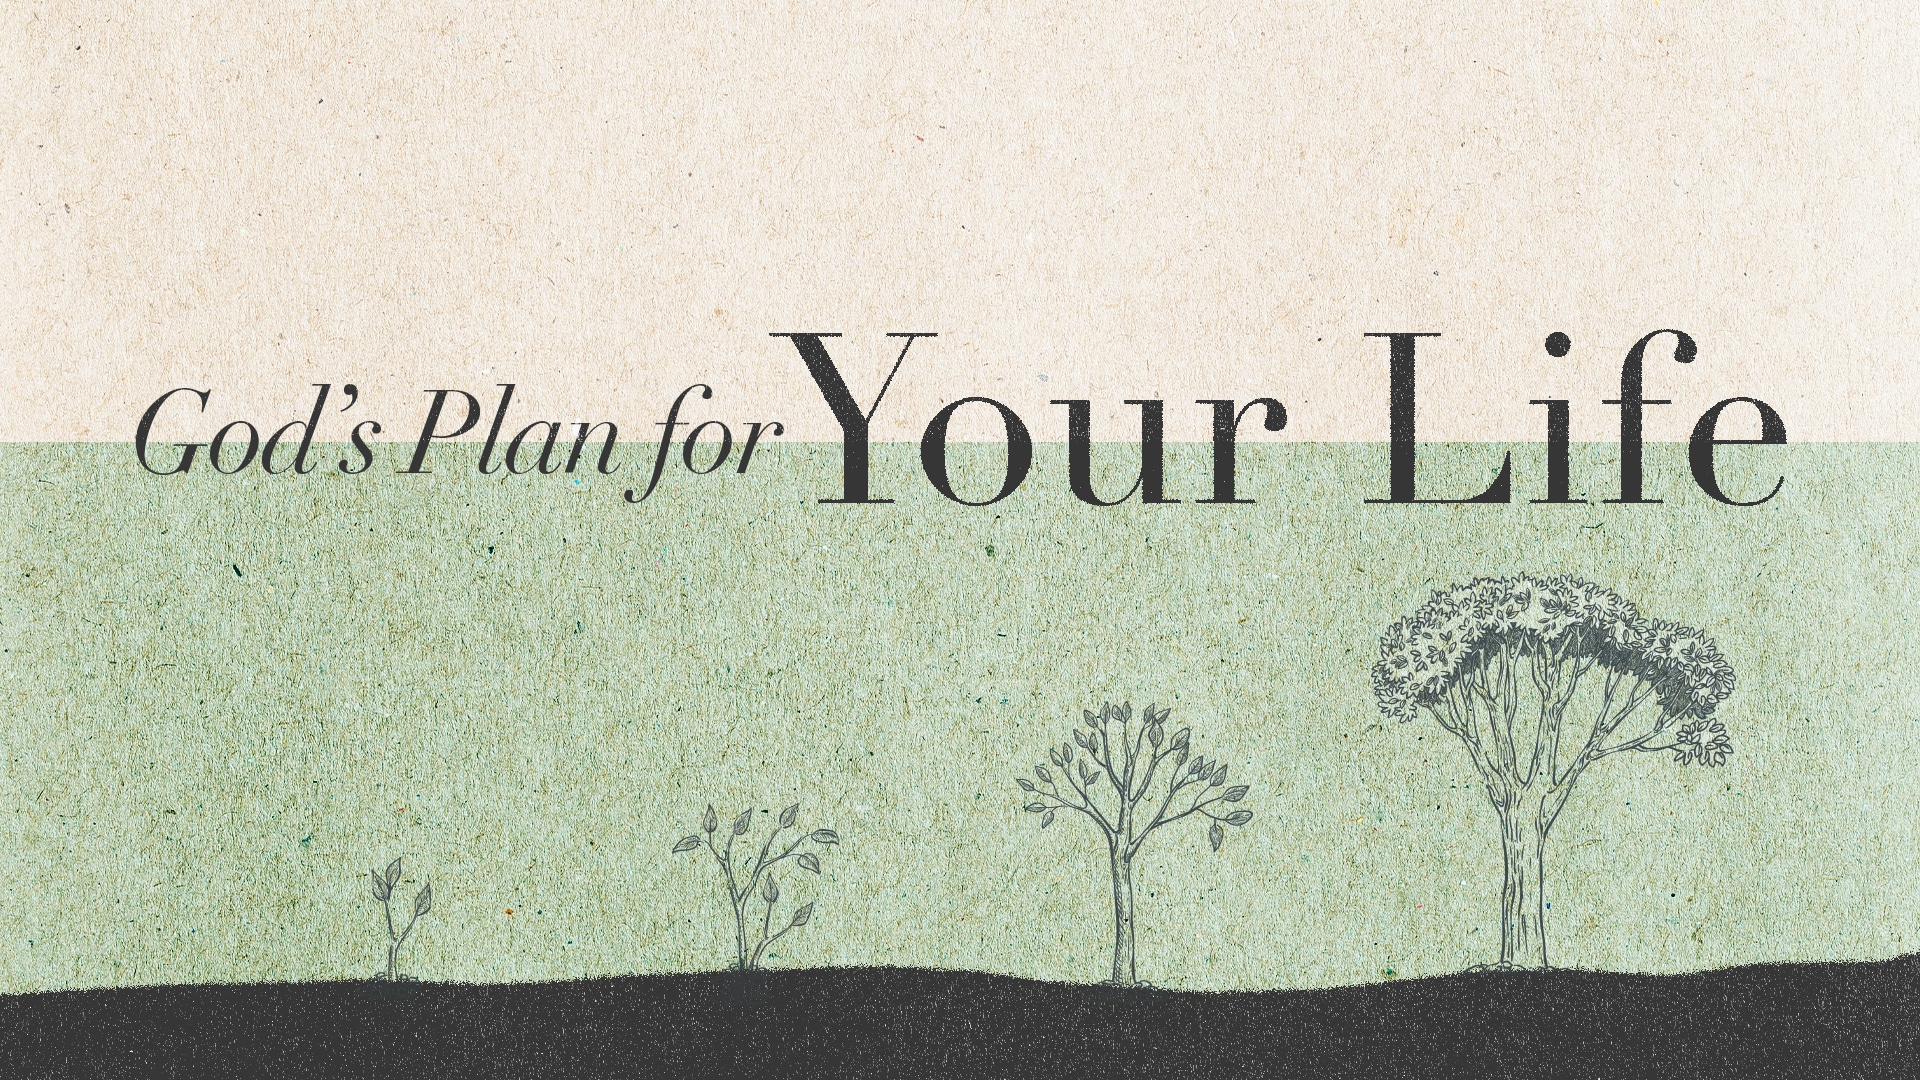 Brooklyn Tabernacle God's Plan for your life thumbnail